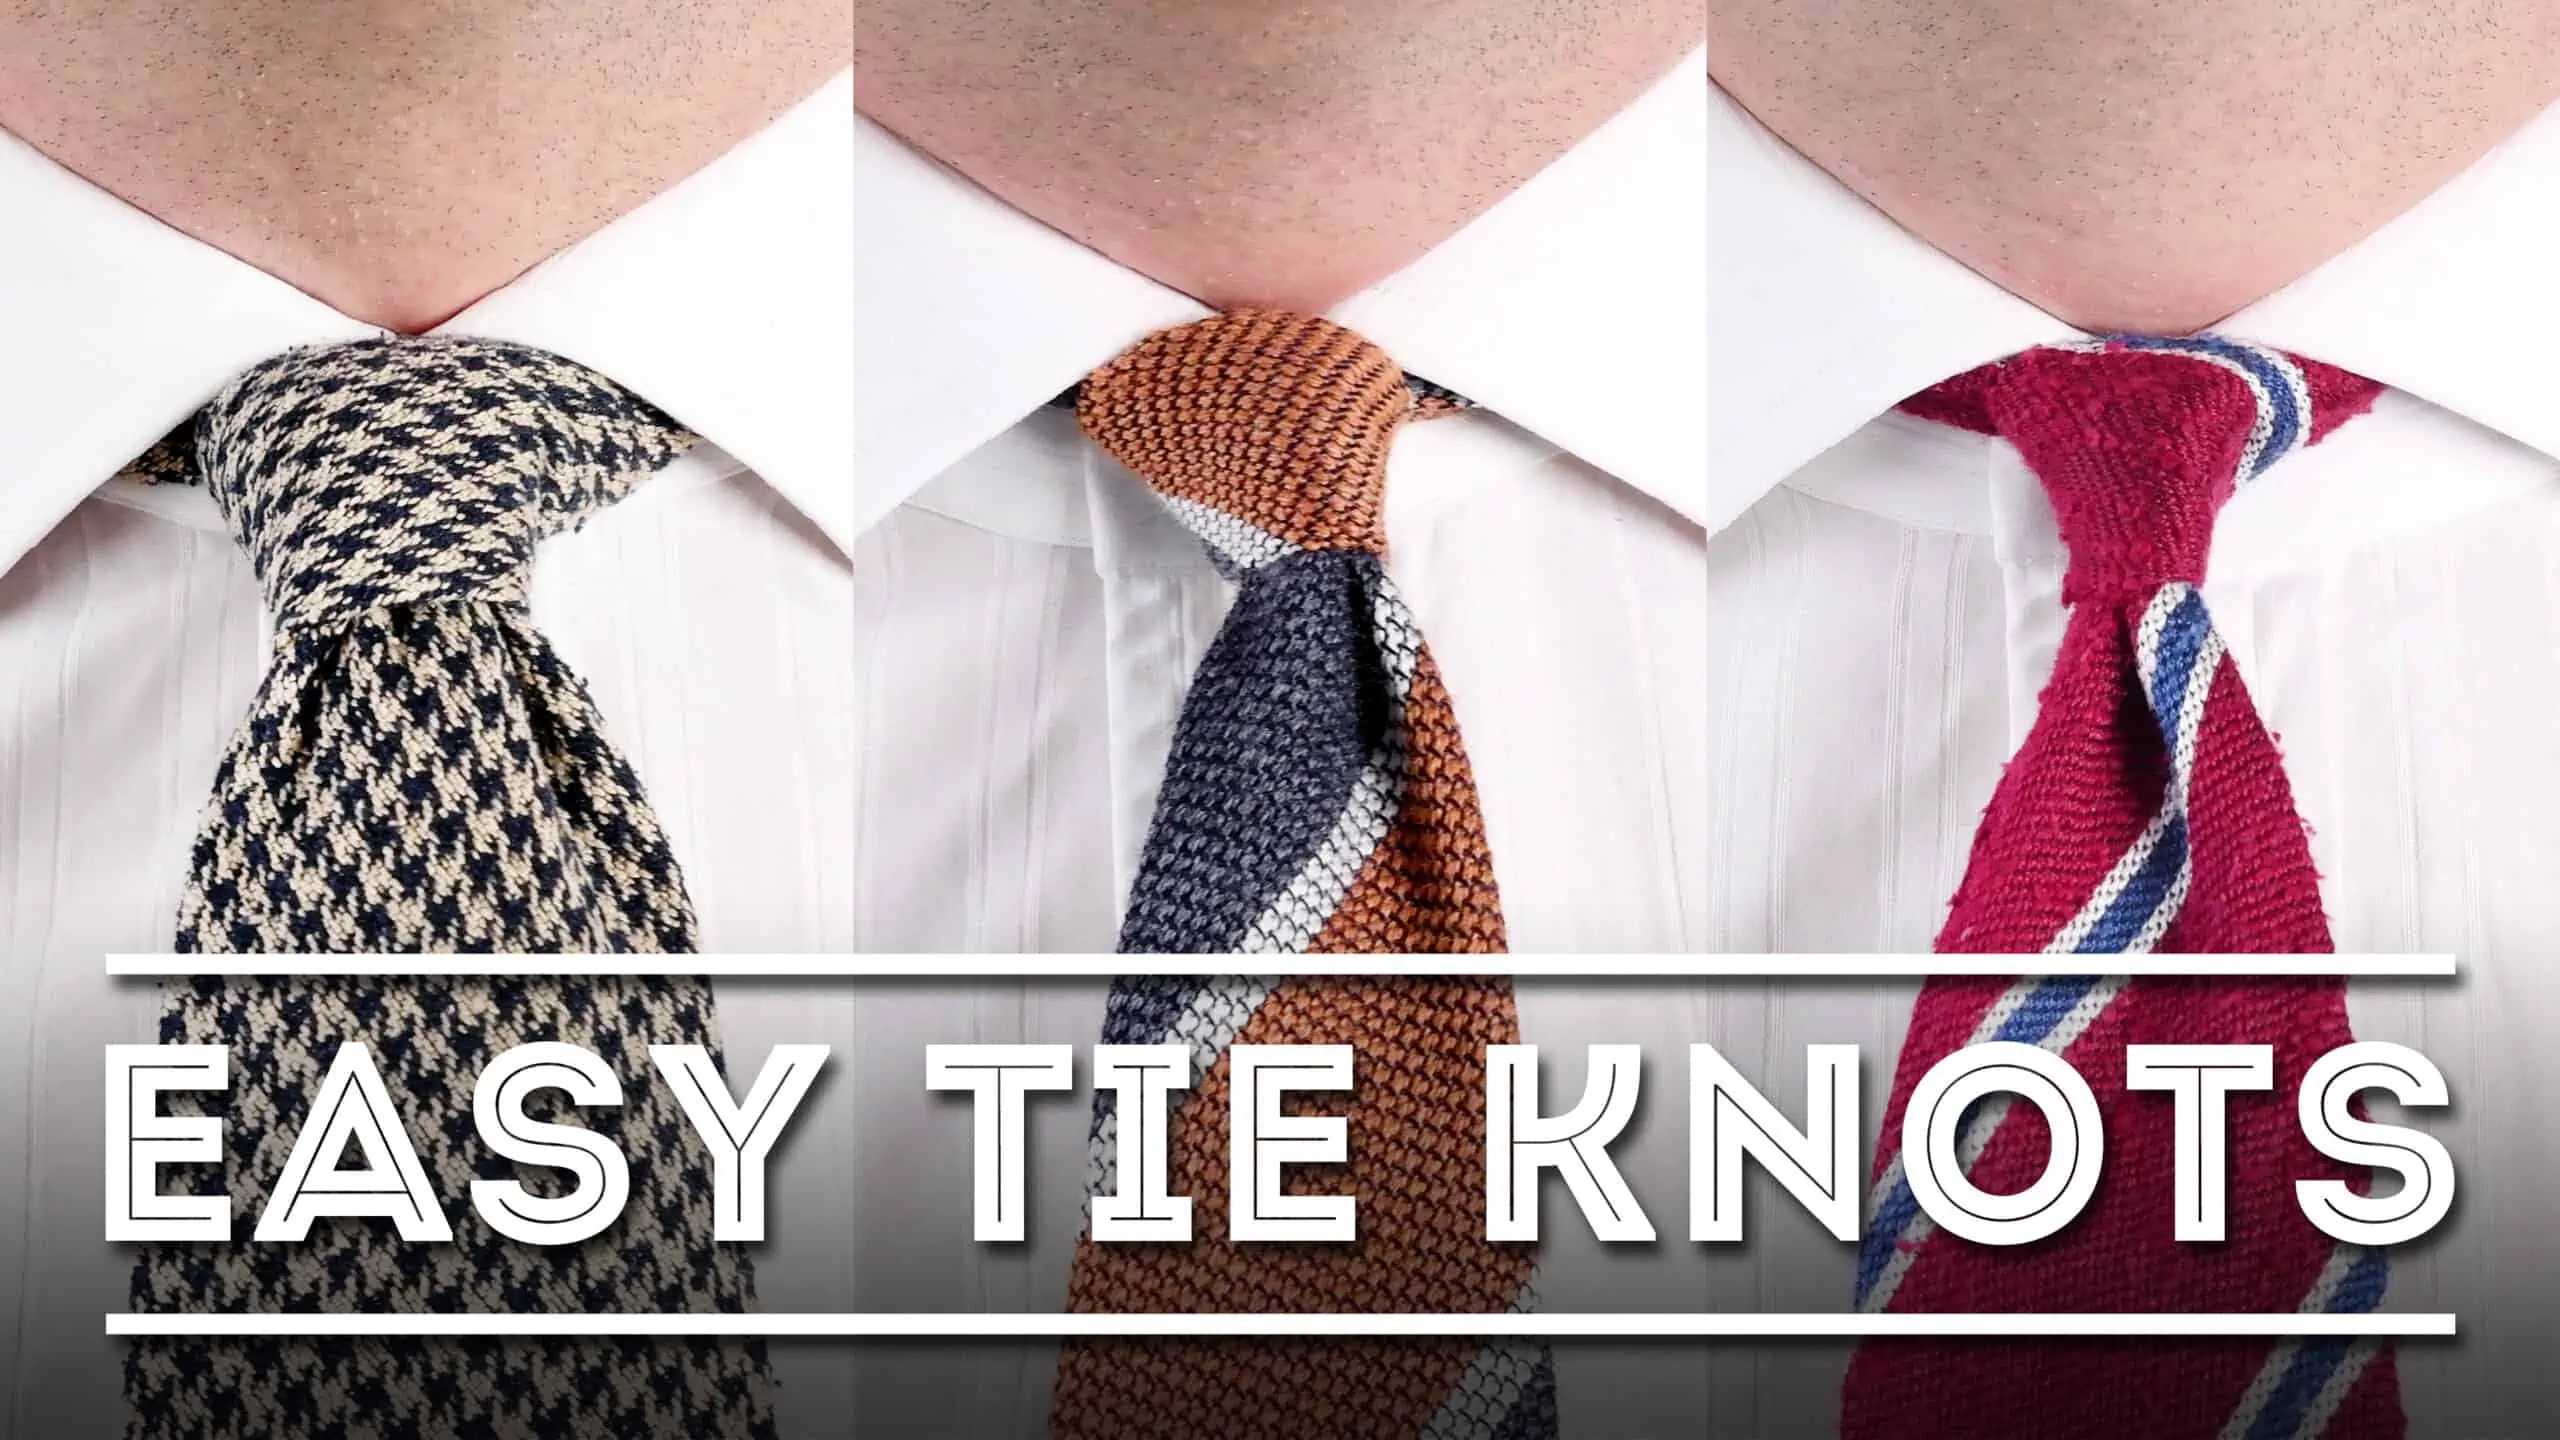 3 Easiest Tie Knots For Beginners - Use These Simple Necktie Knots